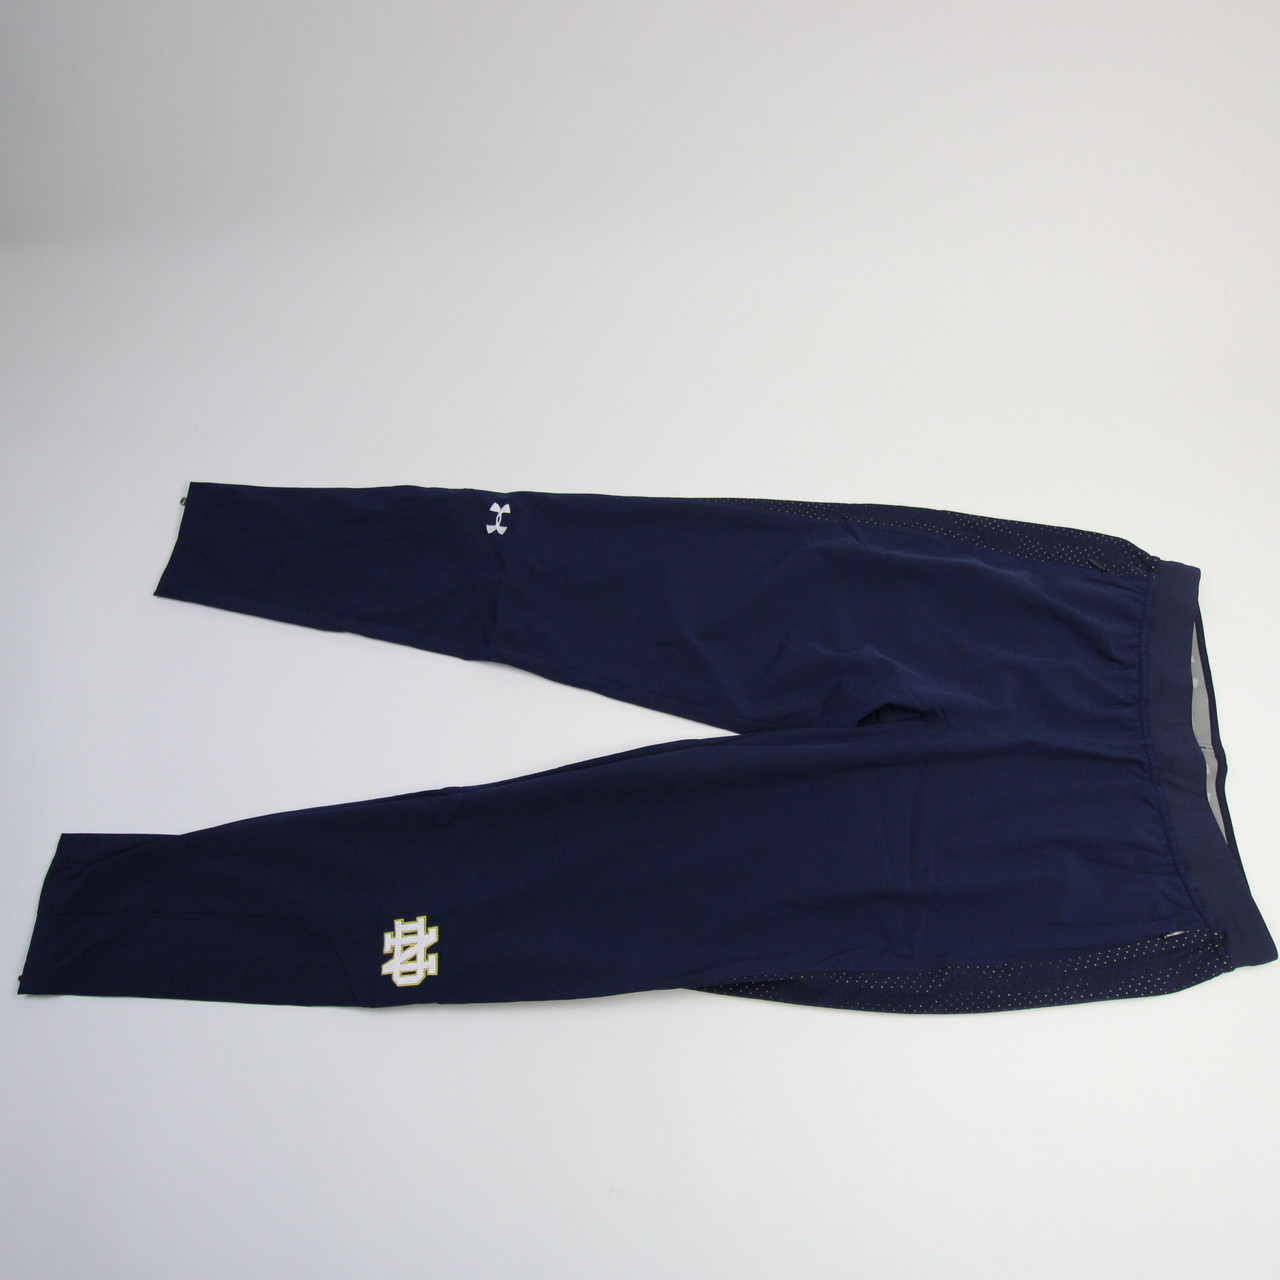 Notre Dame Fighting Irish Under Armour Athletic Pants Women's Navy New M 464